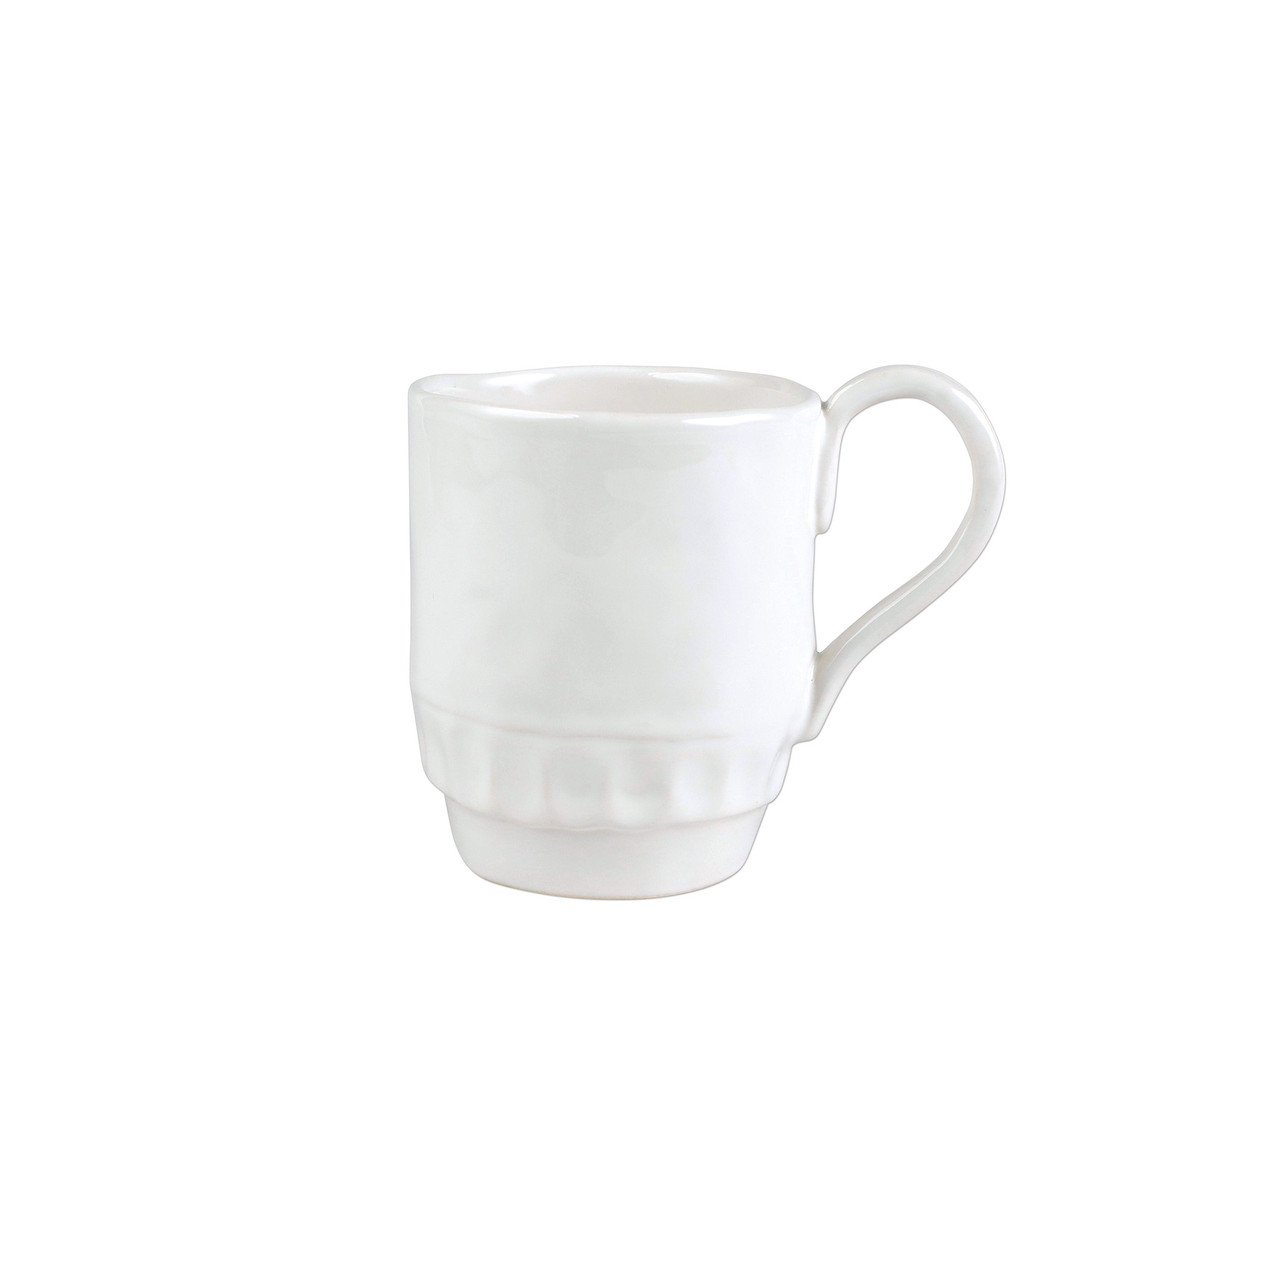 FLORENCE full cup - white